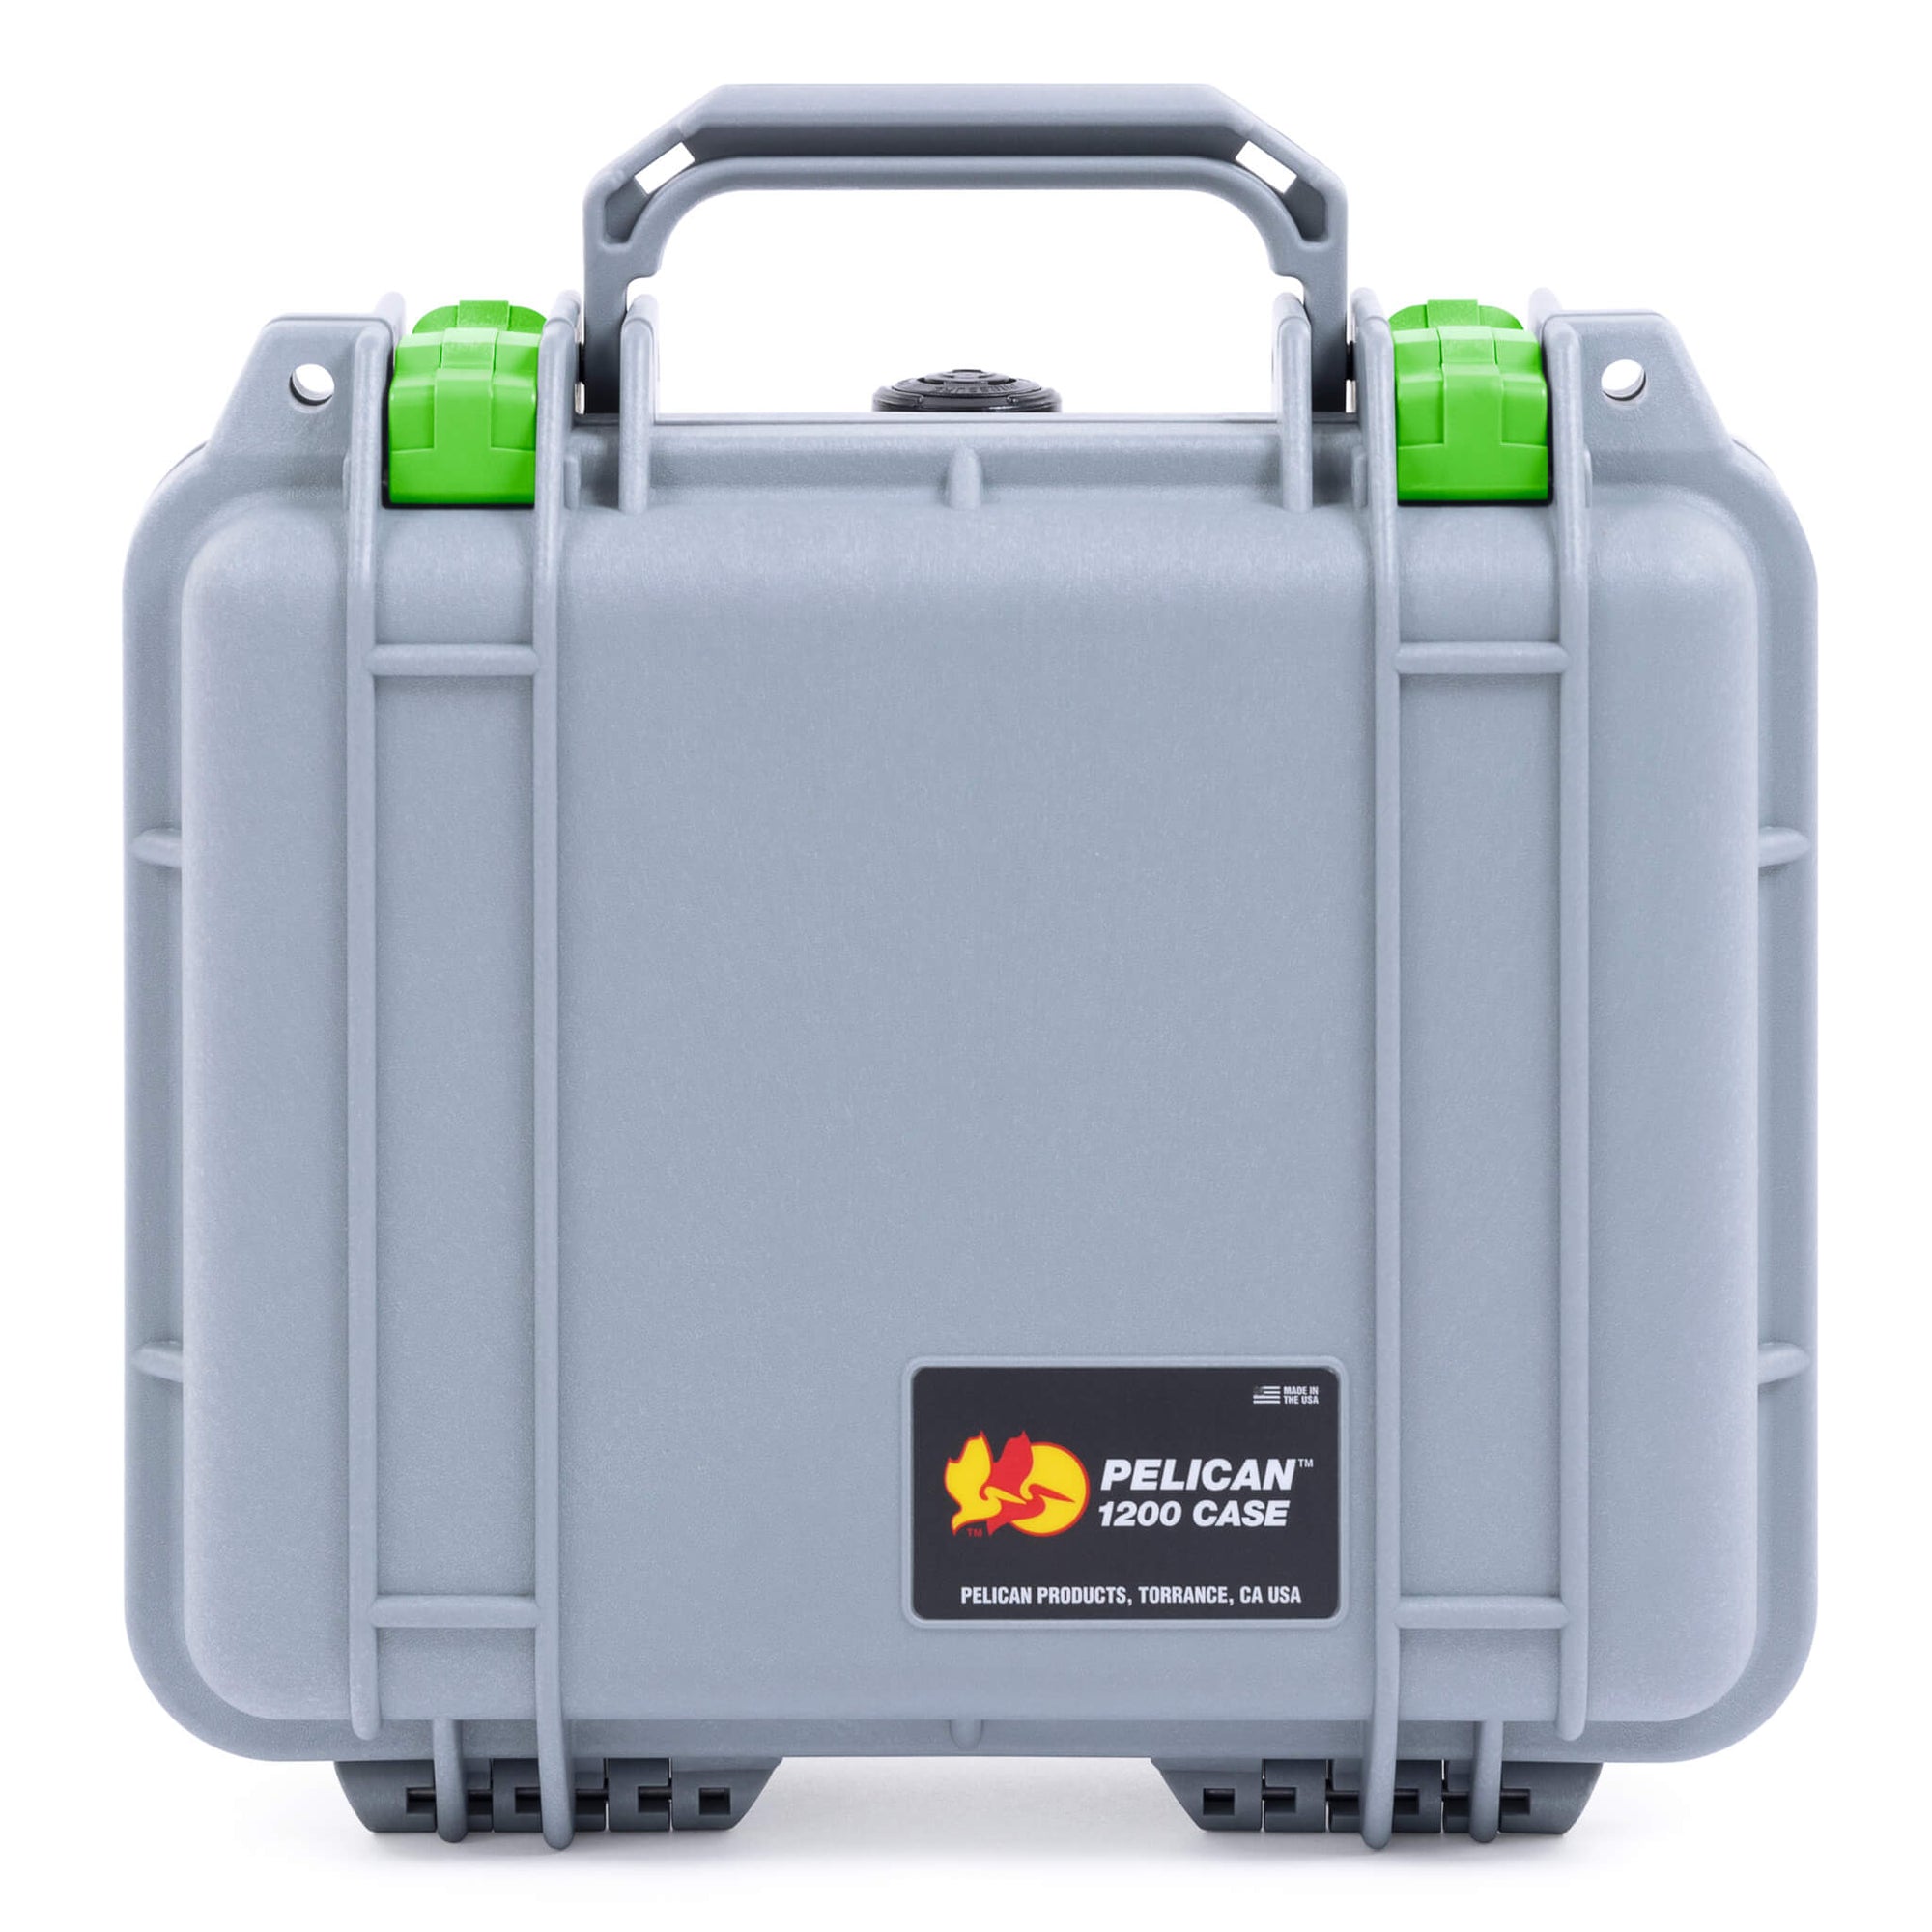 Pelican 1200 Case, Silver with Lime Green Latches ColorCase 